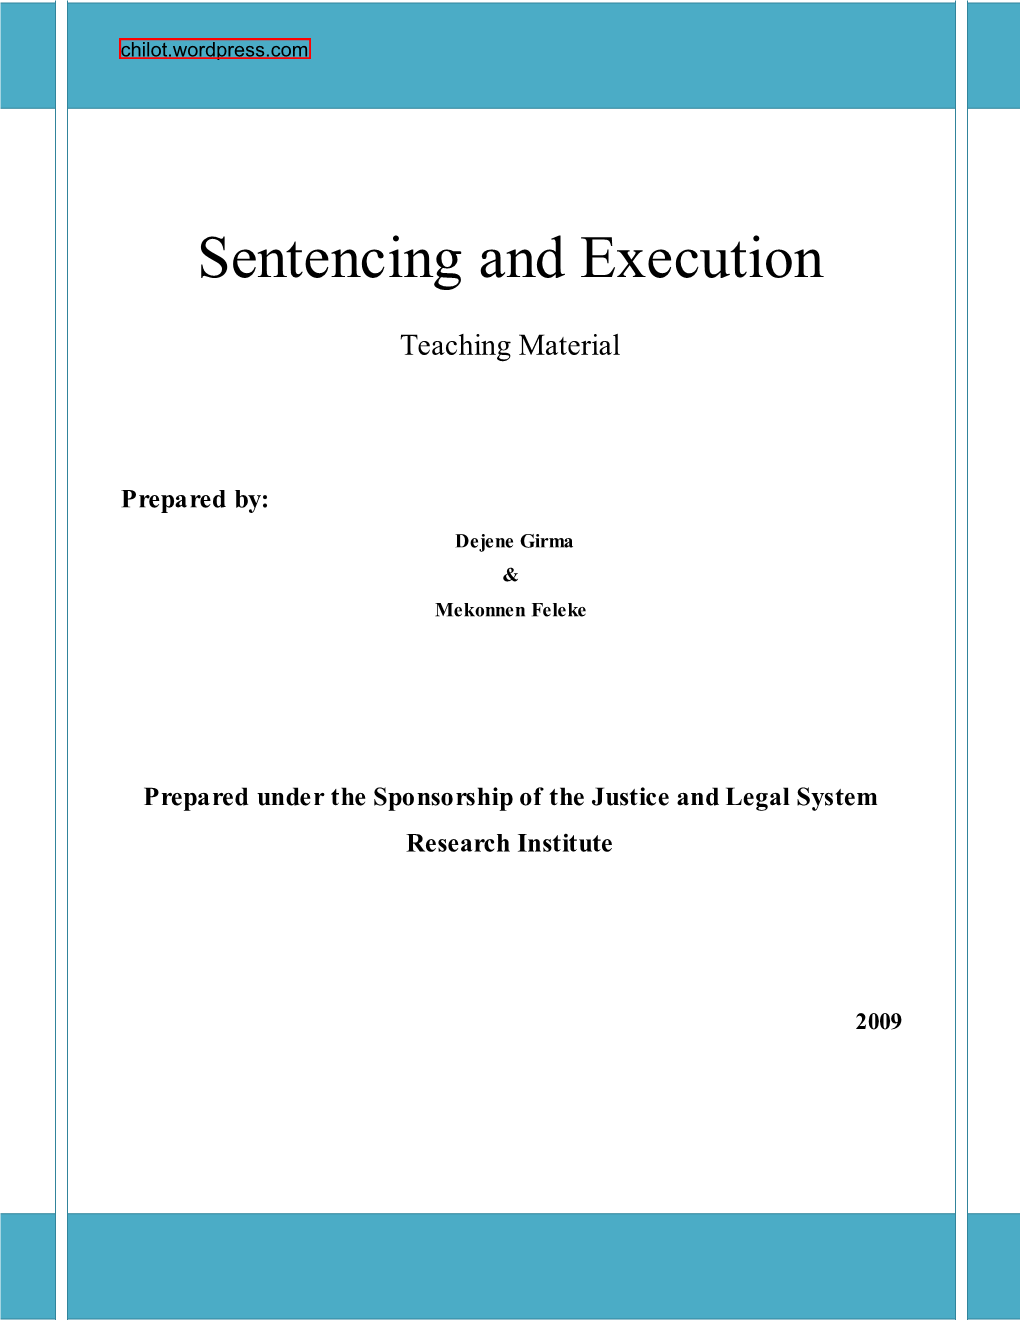 Sentencing and Execution